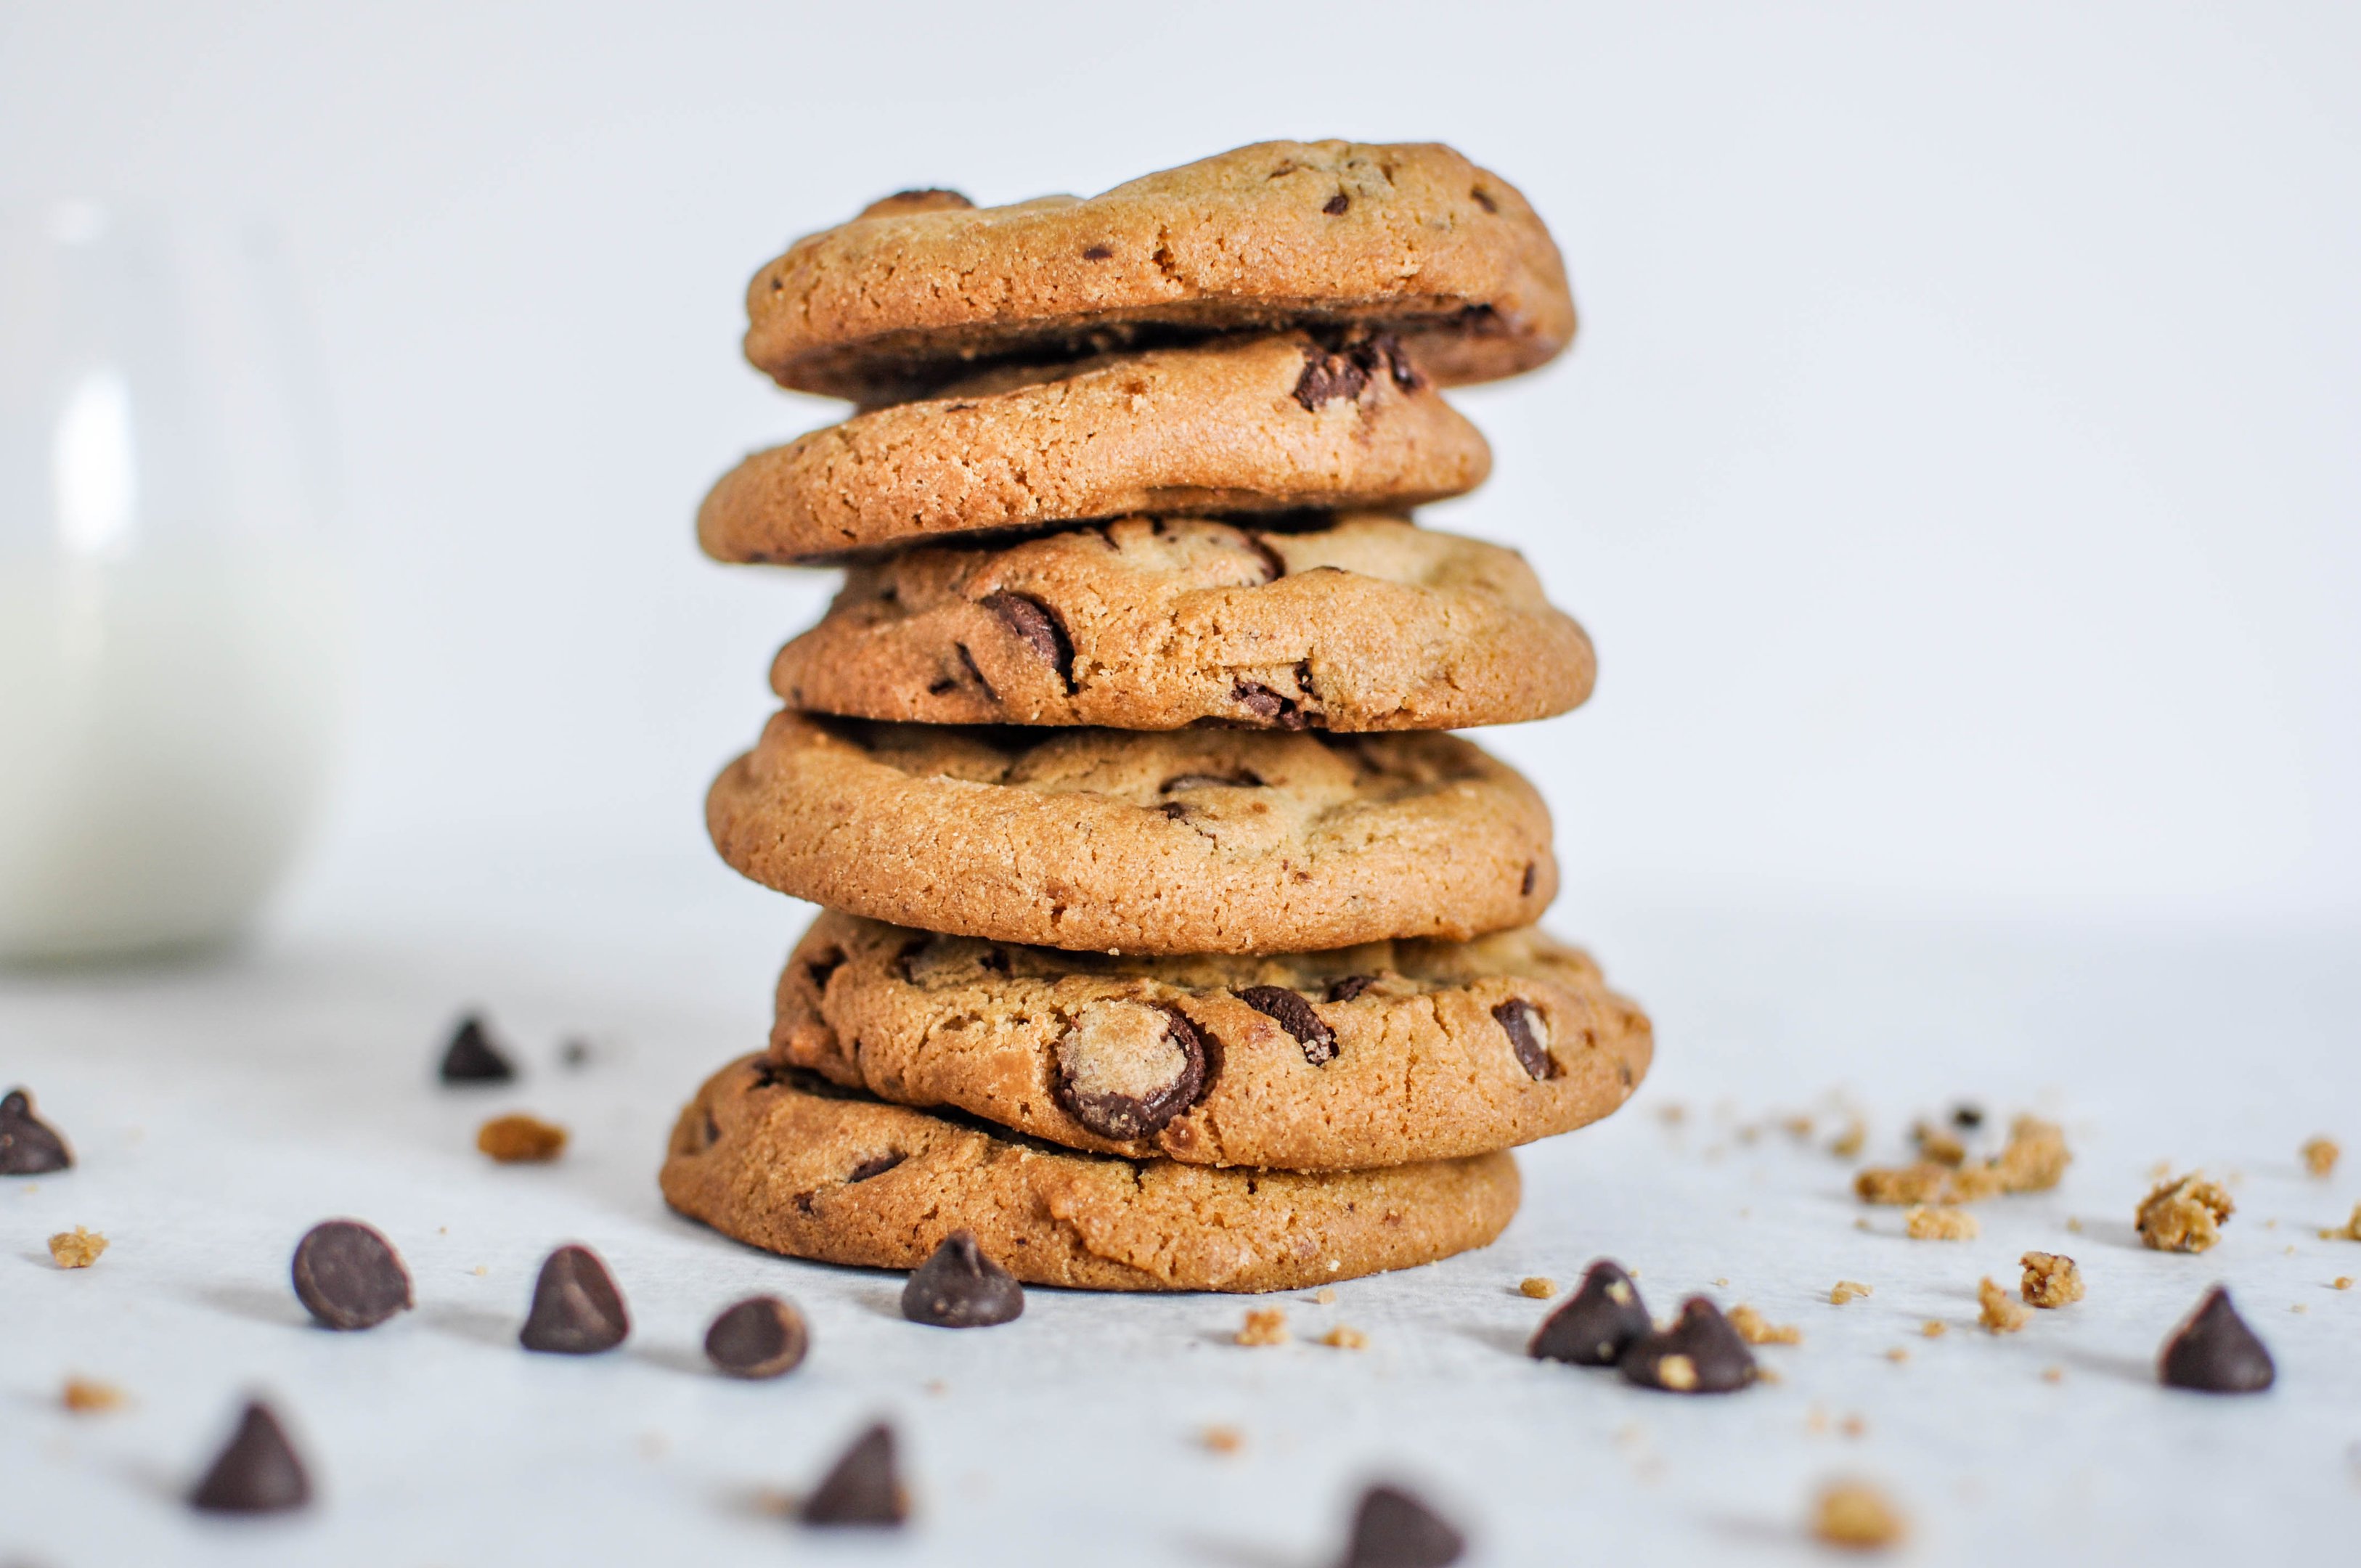 Tasty chocolate chip cookies without brown sugar